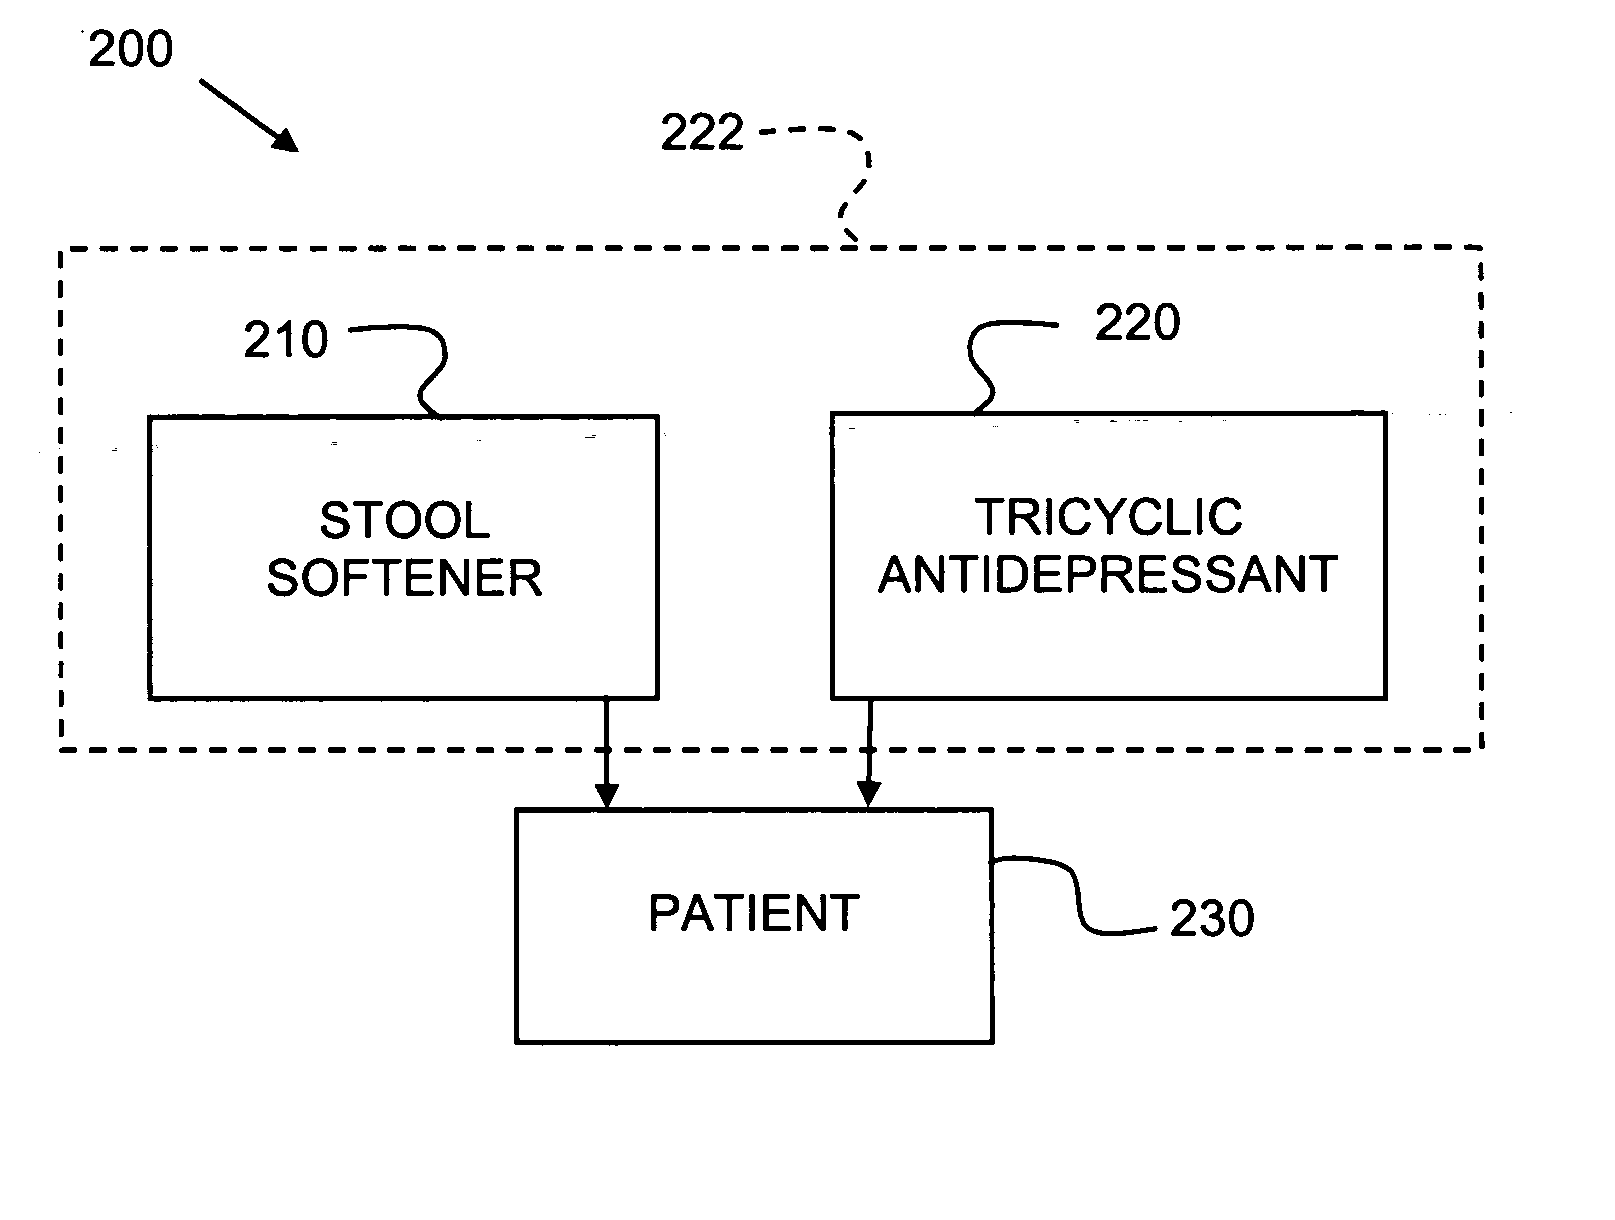 Method and medicine for treating gastrointestinal disorder including irritable bowel syndrome